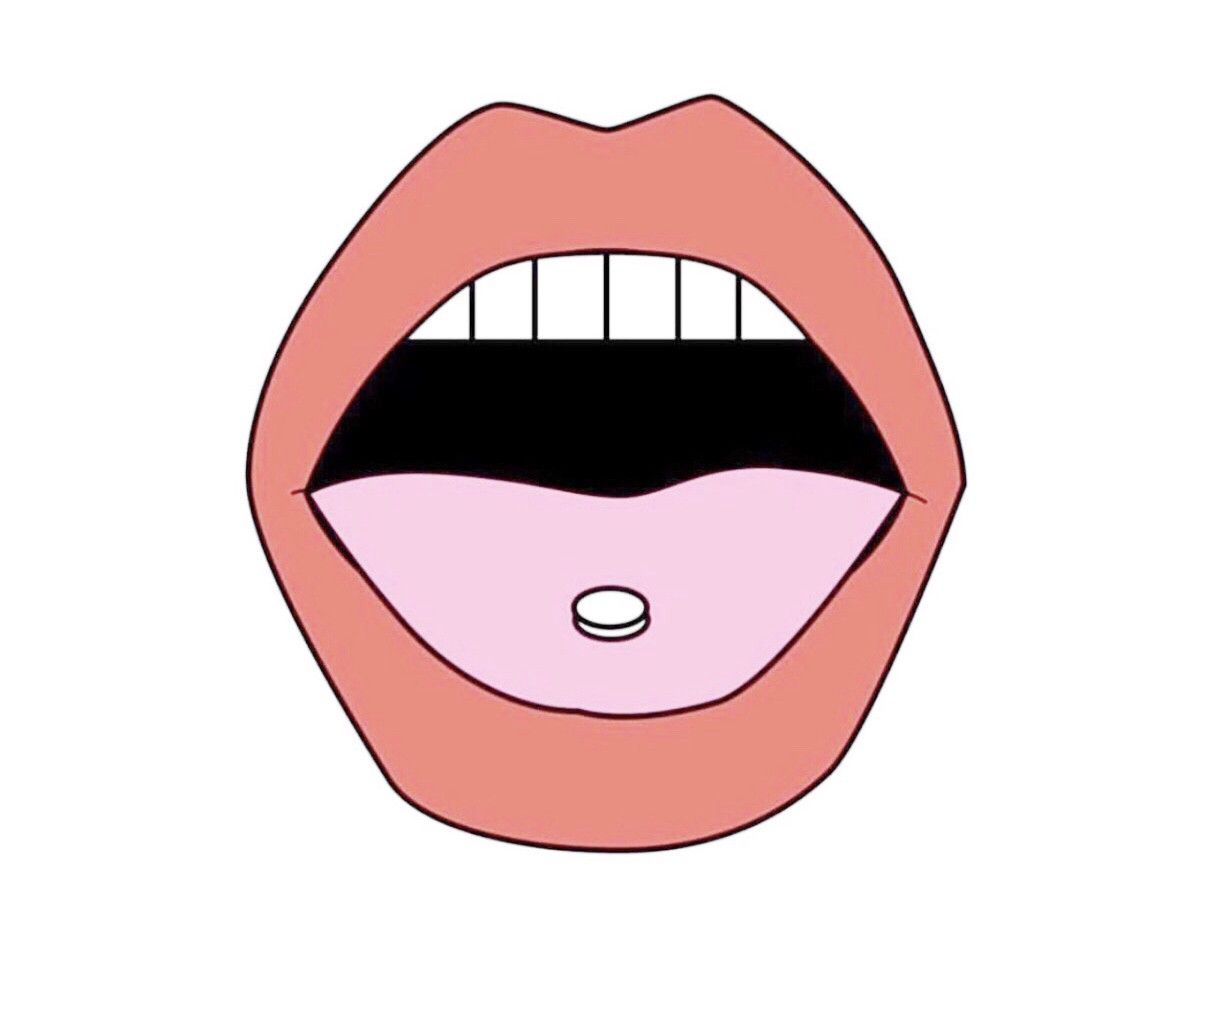 mouth illustration with pill on tongue